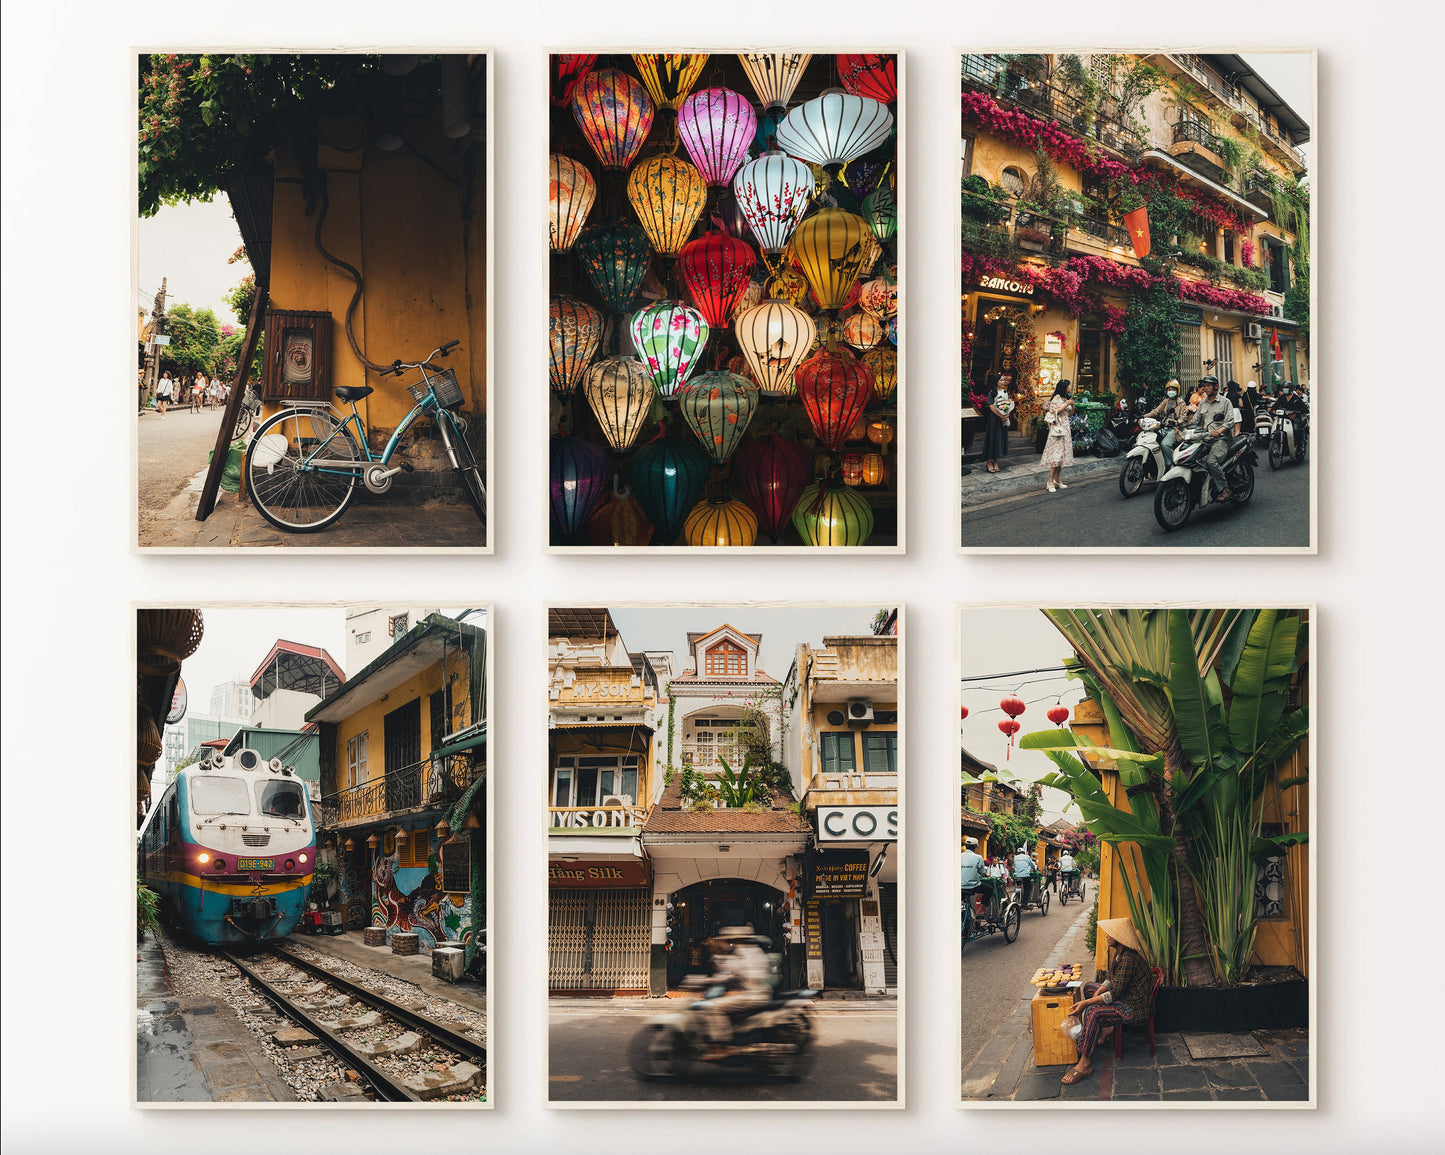 Vietnam Posters Travel Set of 6 Framed Gift Museum-quality Prints Hanoi Culture Photography Hoi An Vietnam Lanterns Gallery Wall Print Set